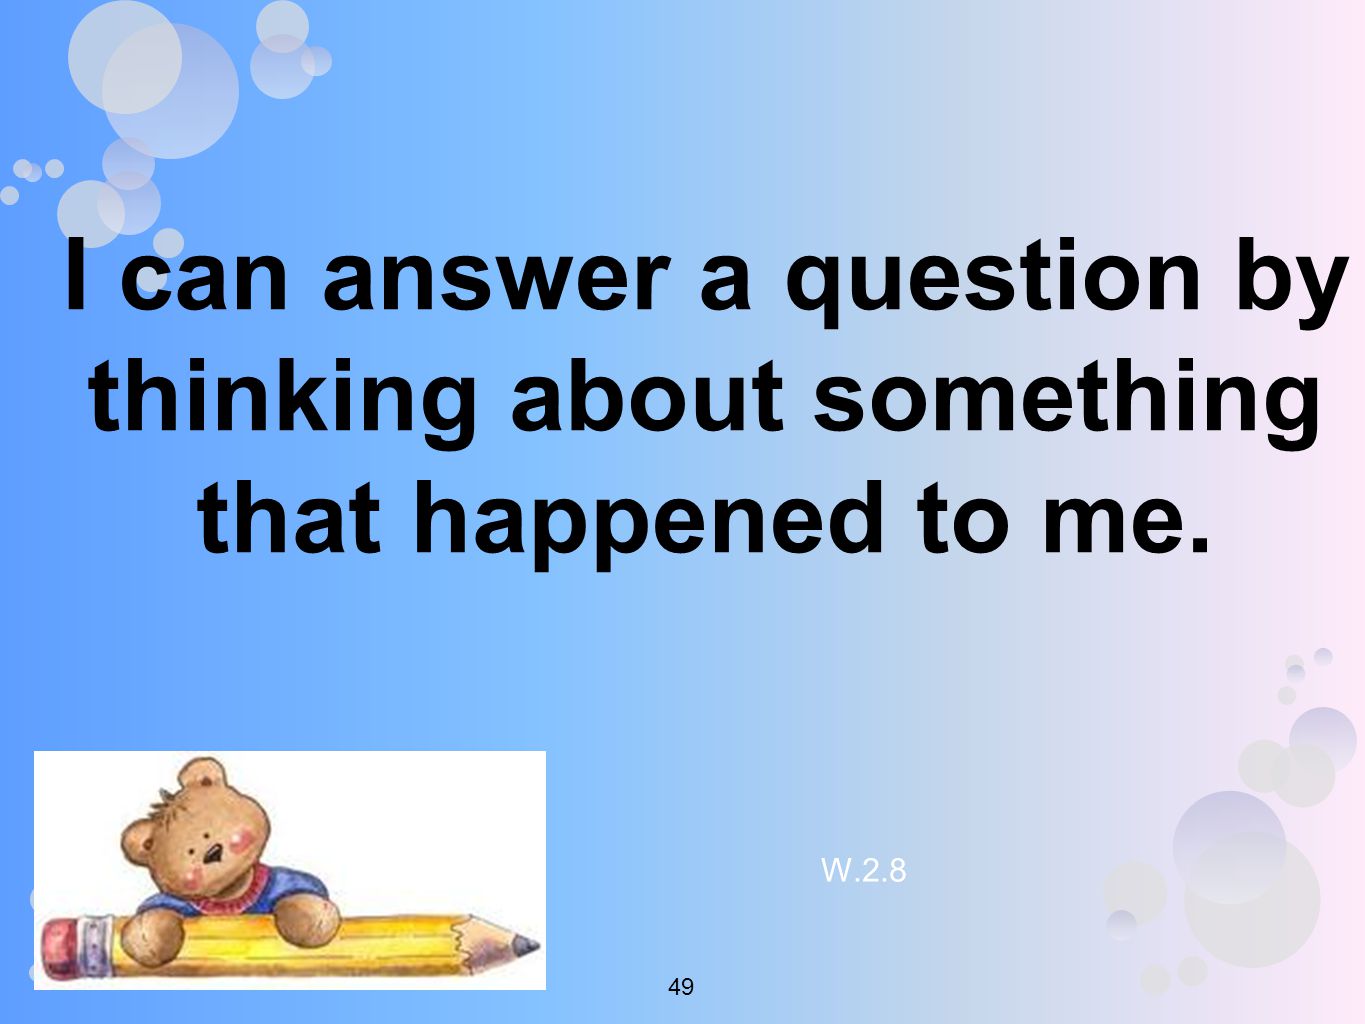 I can answer a question by thinking about something that happened to me. W